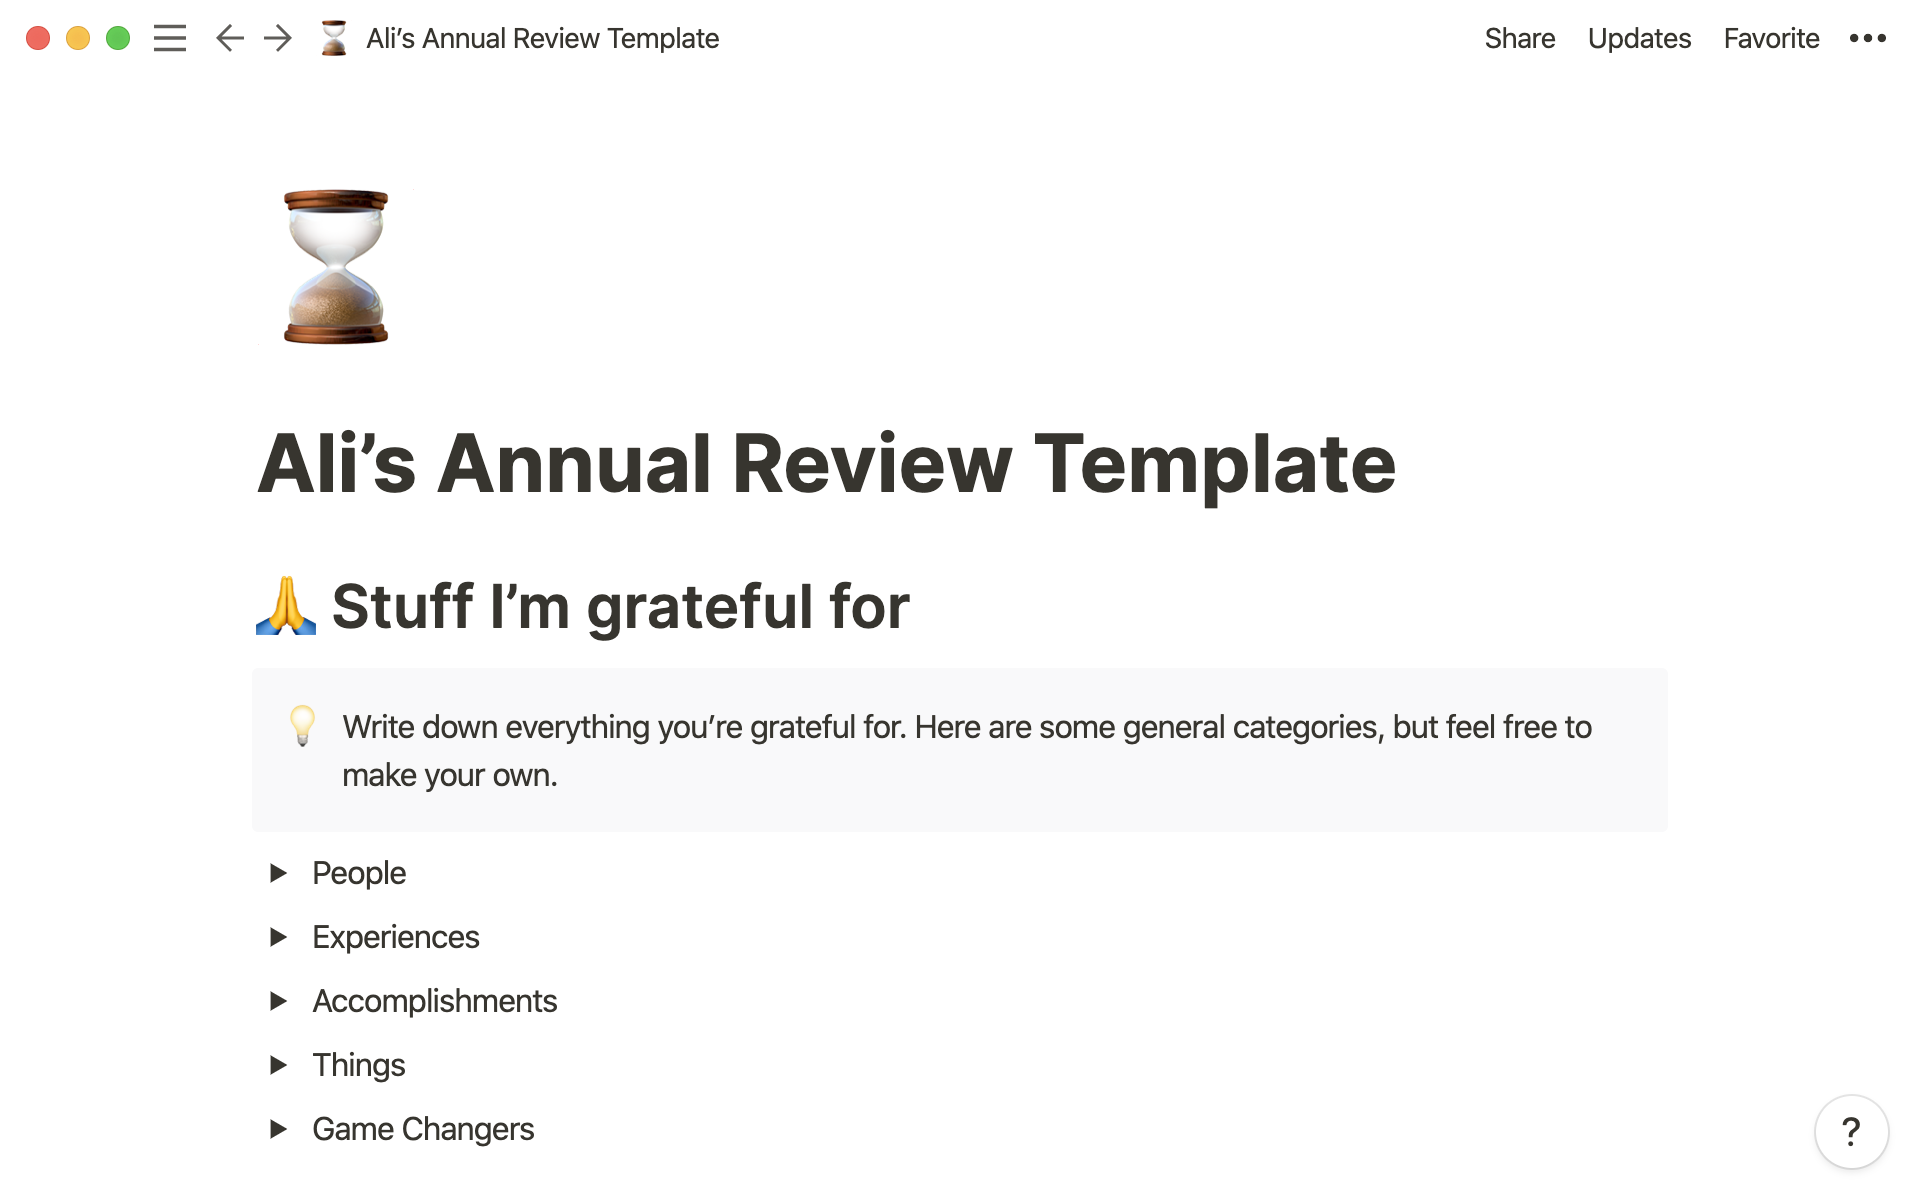 An annual review template that helps you focus on what’s important in your life.